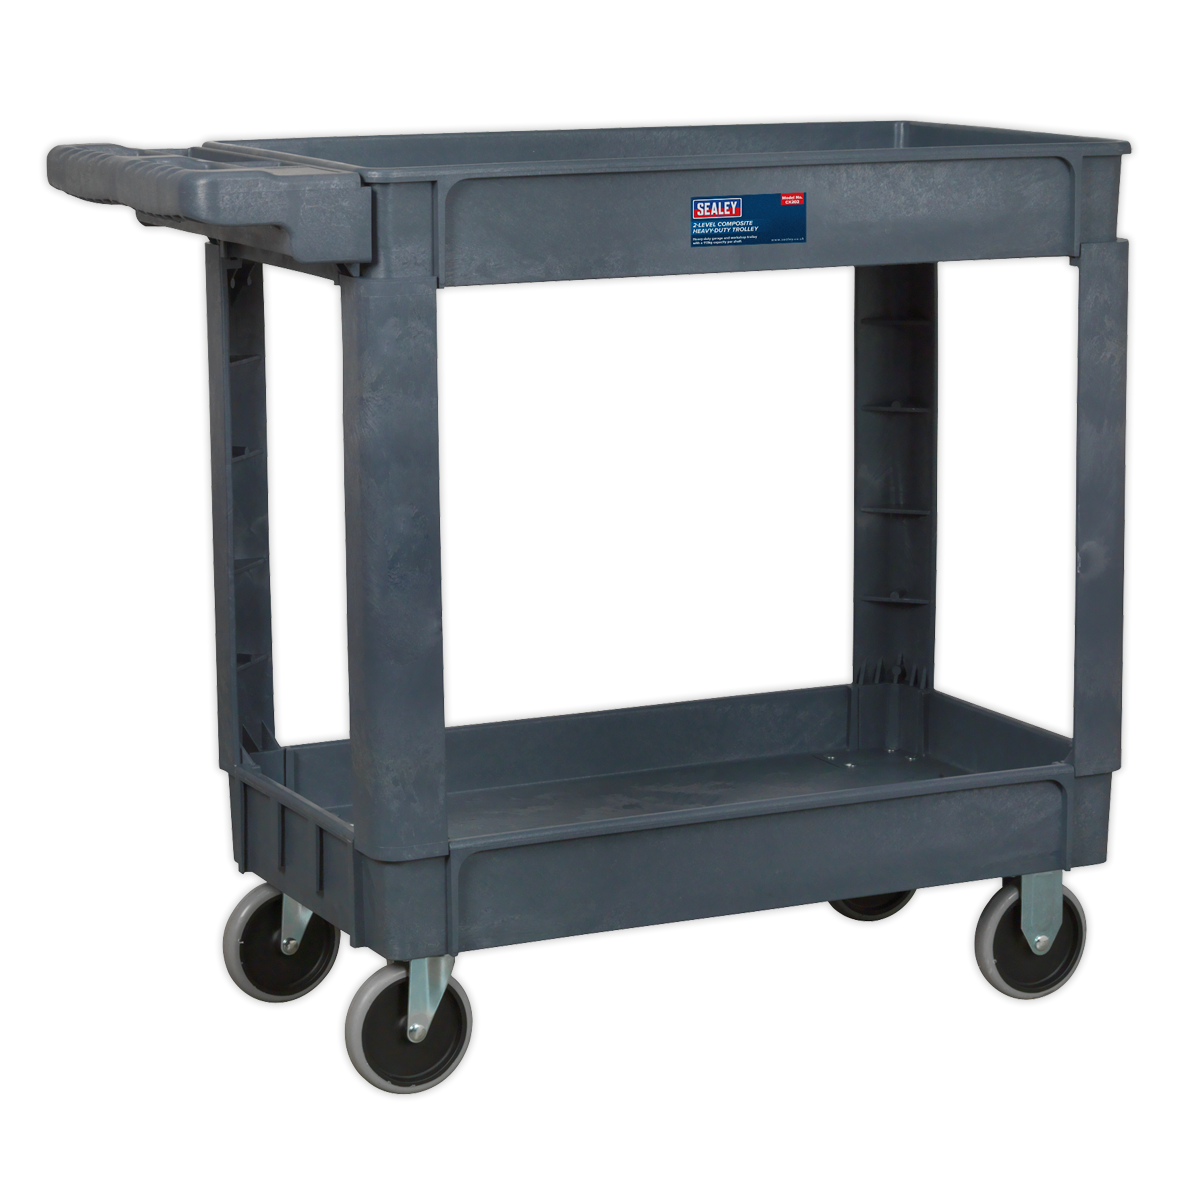 SEALEY TROLLEY WITH HANDLE 2-LEVEL COMPOSITE HEAVY DUTY